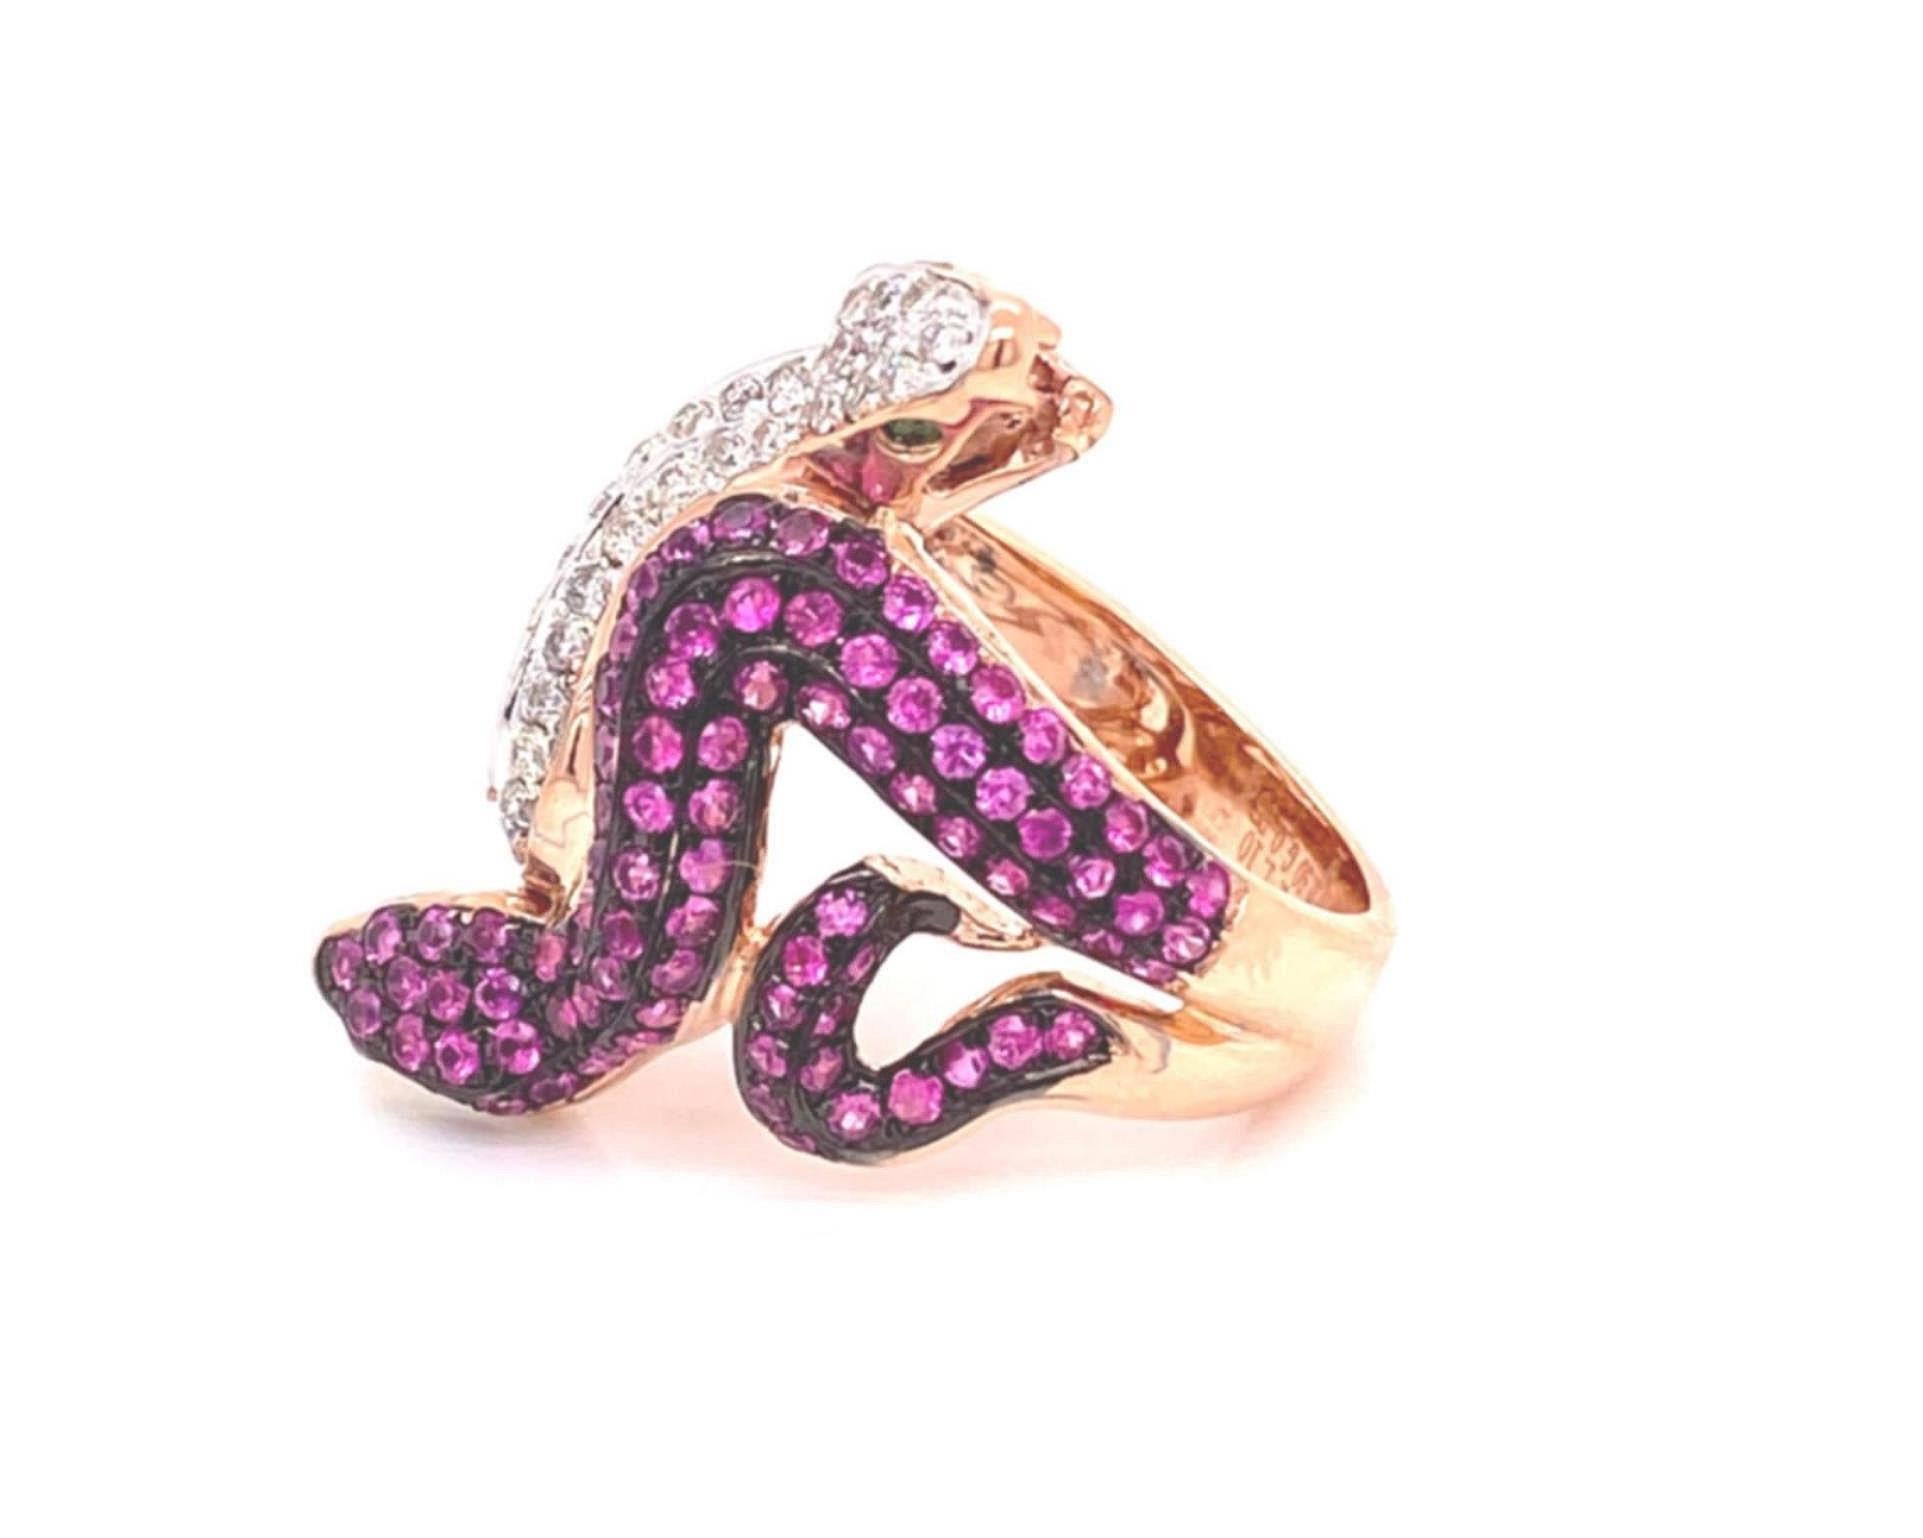 This is a stunning double snake ring, crafted from 18k rose and white gold with a polished finish featuring two snakes with head opposite end on the long part of the ring. One snake has rubies mounted in black rhodium with rose gold body and green